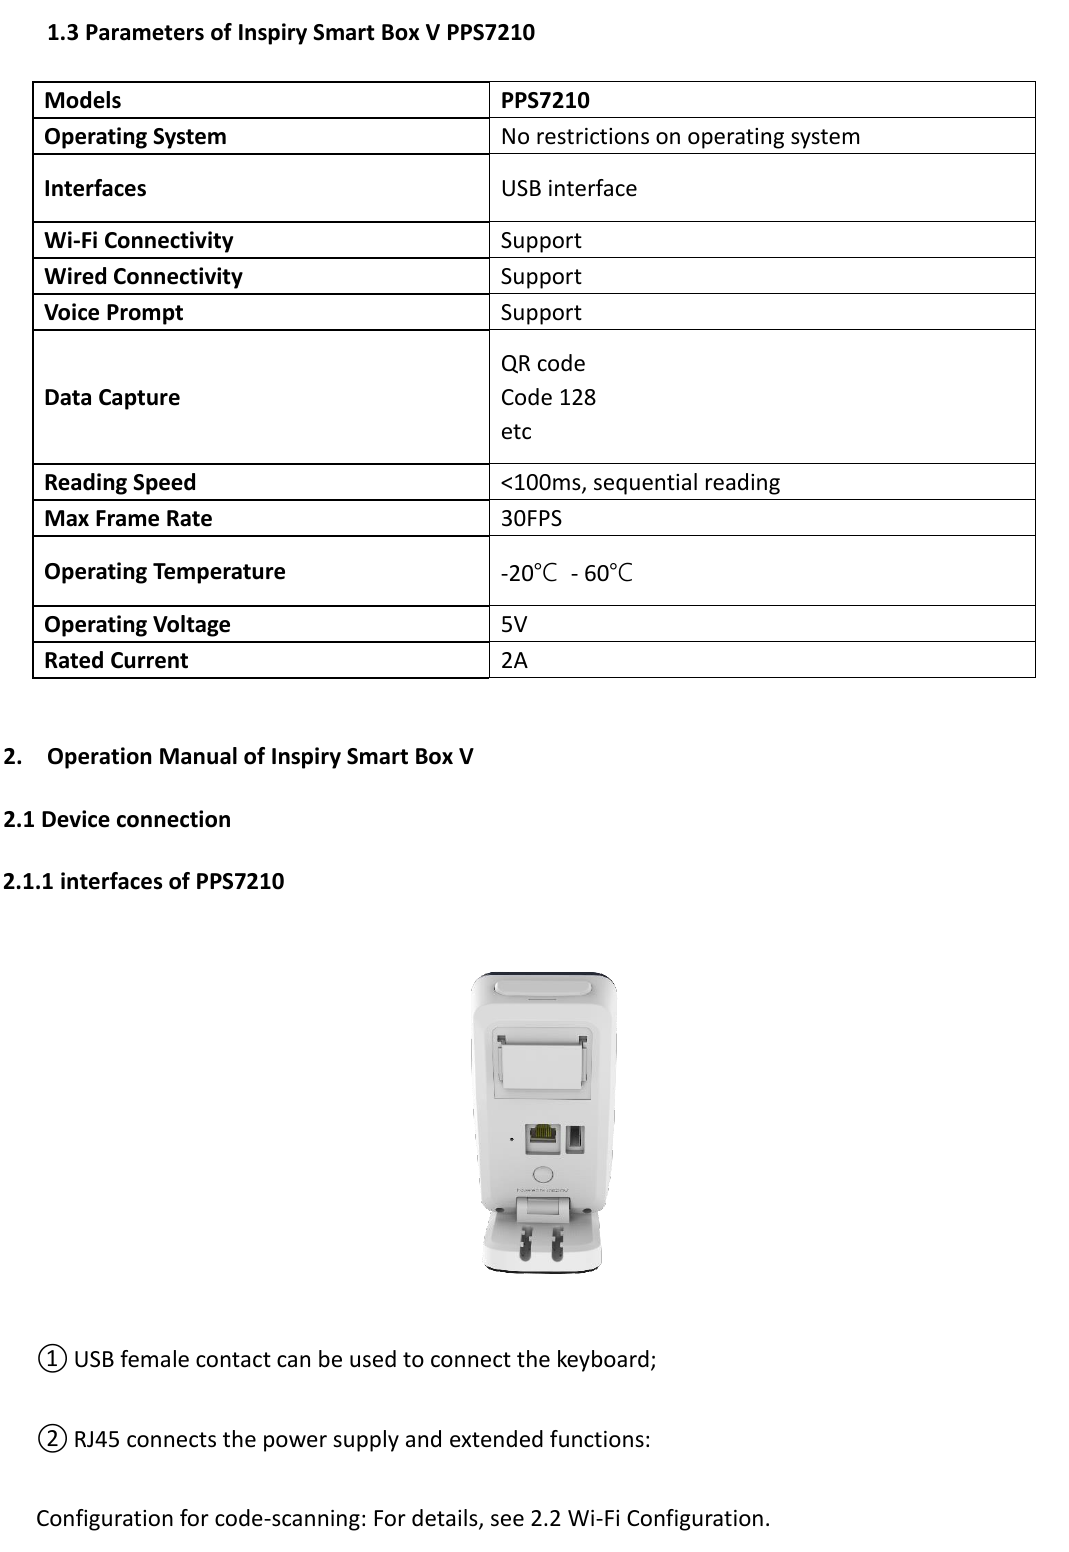   1.3 Parameters of Inspiry Smart Box V PPS7210  2. Operation Manual of Inspiry Smart Box V   2.1 Device connection 2.1.1 interfaces of PPS7210  ① USB female contact can be used to connect the keyboard; ② RJ45 connects the power supply and extended functions: Configuration for code-scanning: For details, see 2.2 Wi-Fi Configuration. Models PPS7210 Operating System No restrictions on operating system Interfaces USB interface Wi-Fi Connectivity Support Wired Connectivity Support Voice Prompt Support   Data Capture QR code Code 128 etc Reading Speed &lt;100ms, sequential reading Max Frame Rate 30FPS Operating Temperature -20℃  - 60℃ Operating Voltage 5V Rated Current 2A 